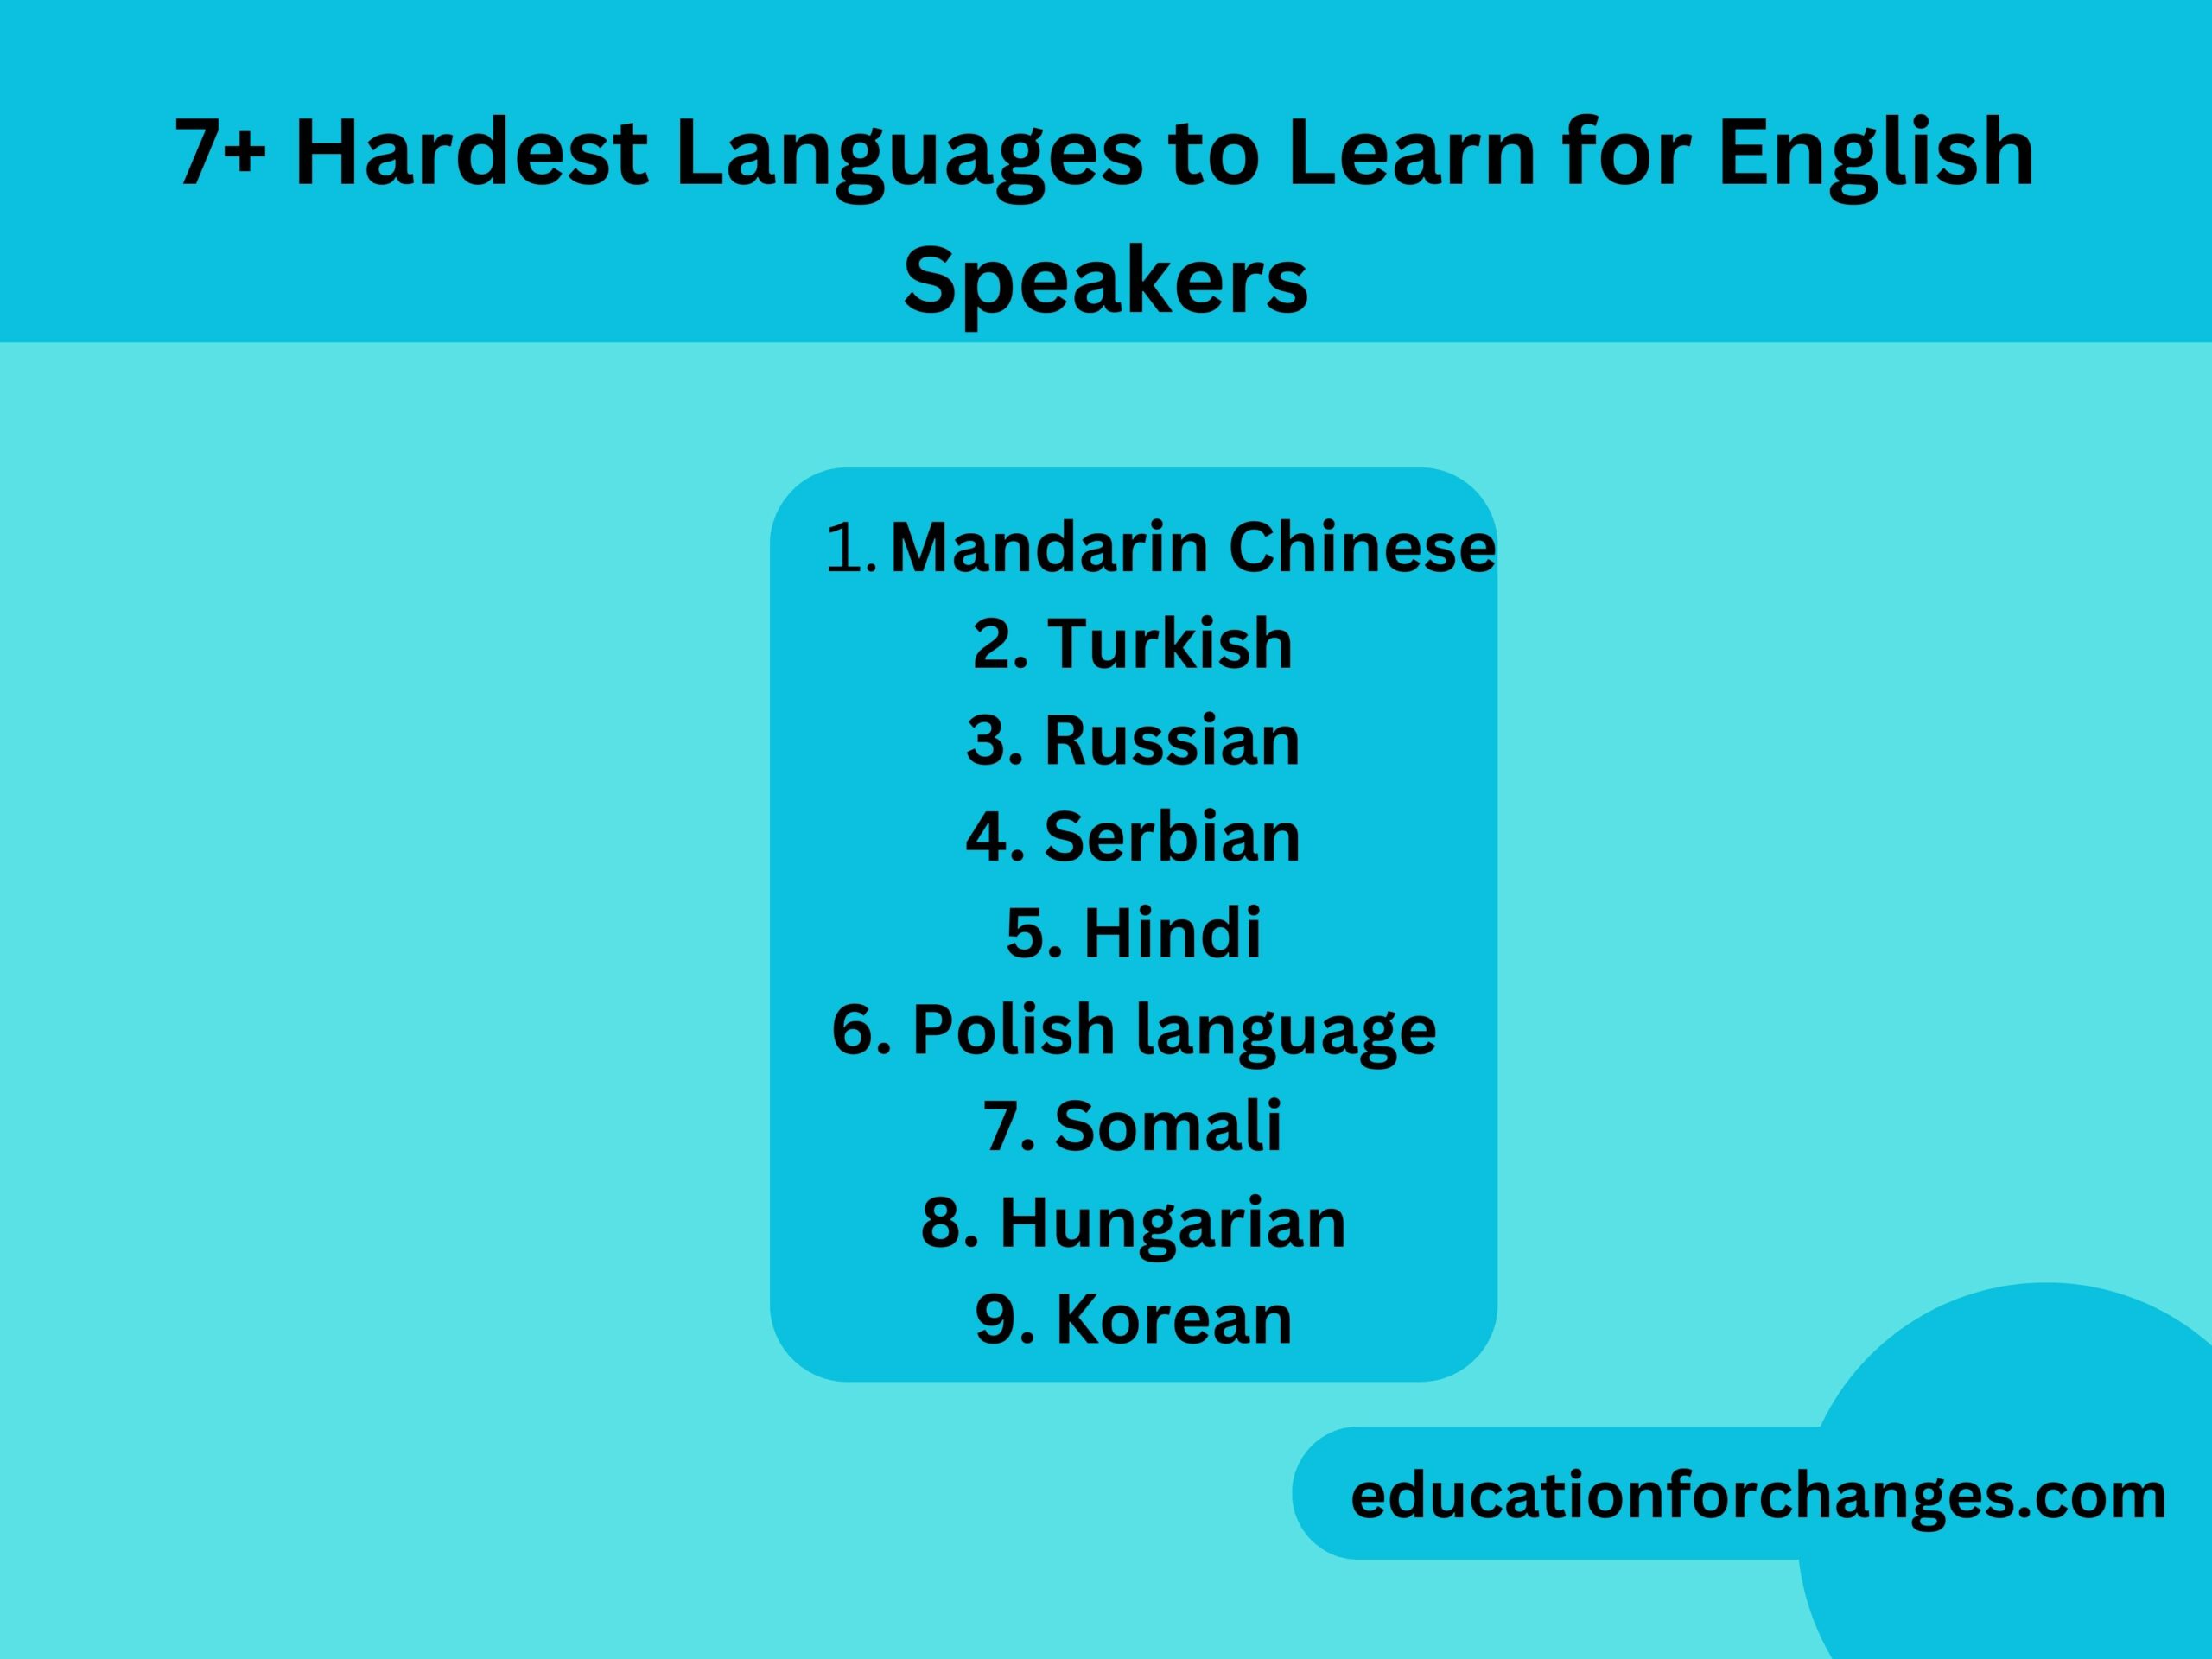 7+ Hardest Languages to Learn for English Speakers